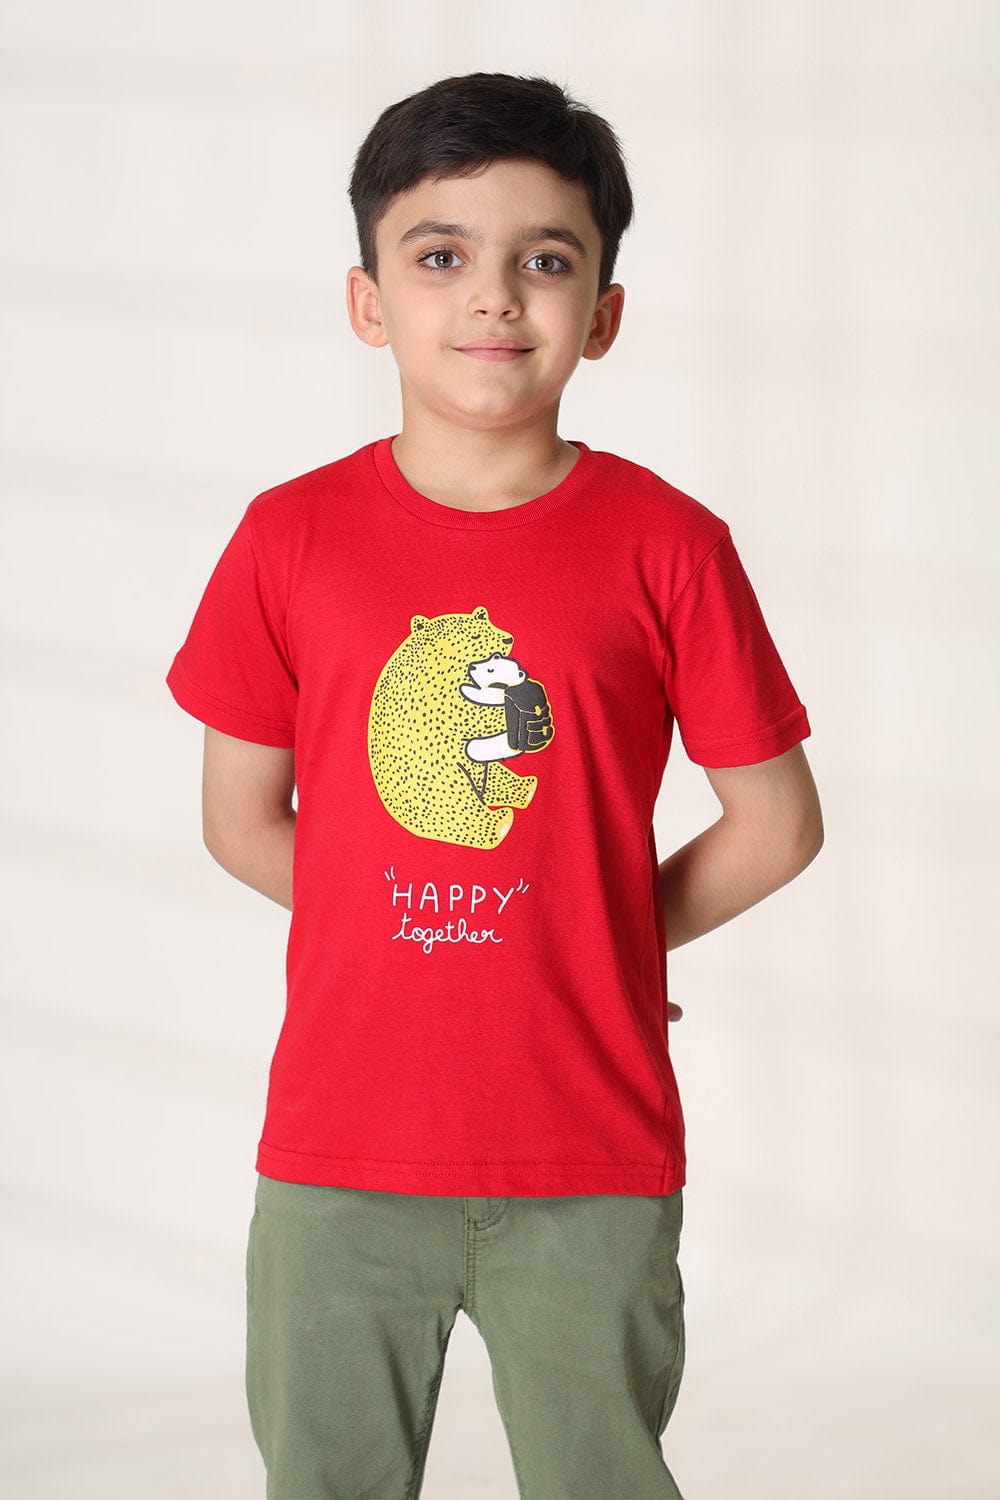 Hope Not Out by Shahid Afridi Boys Knit T-Shirt Boys Red Happy Together T-Shirt